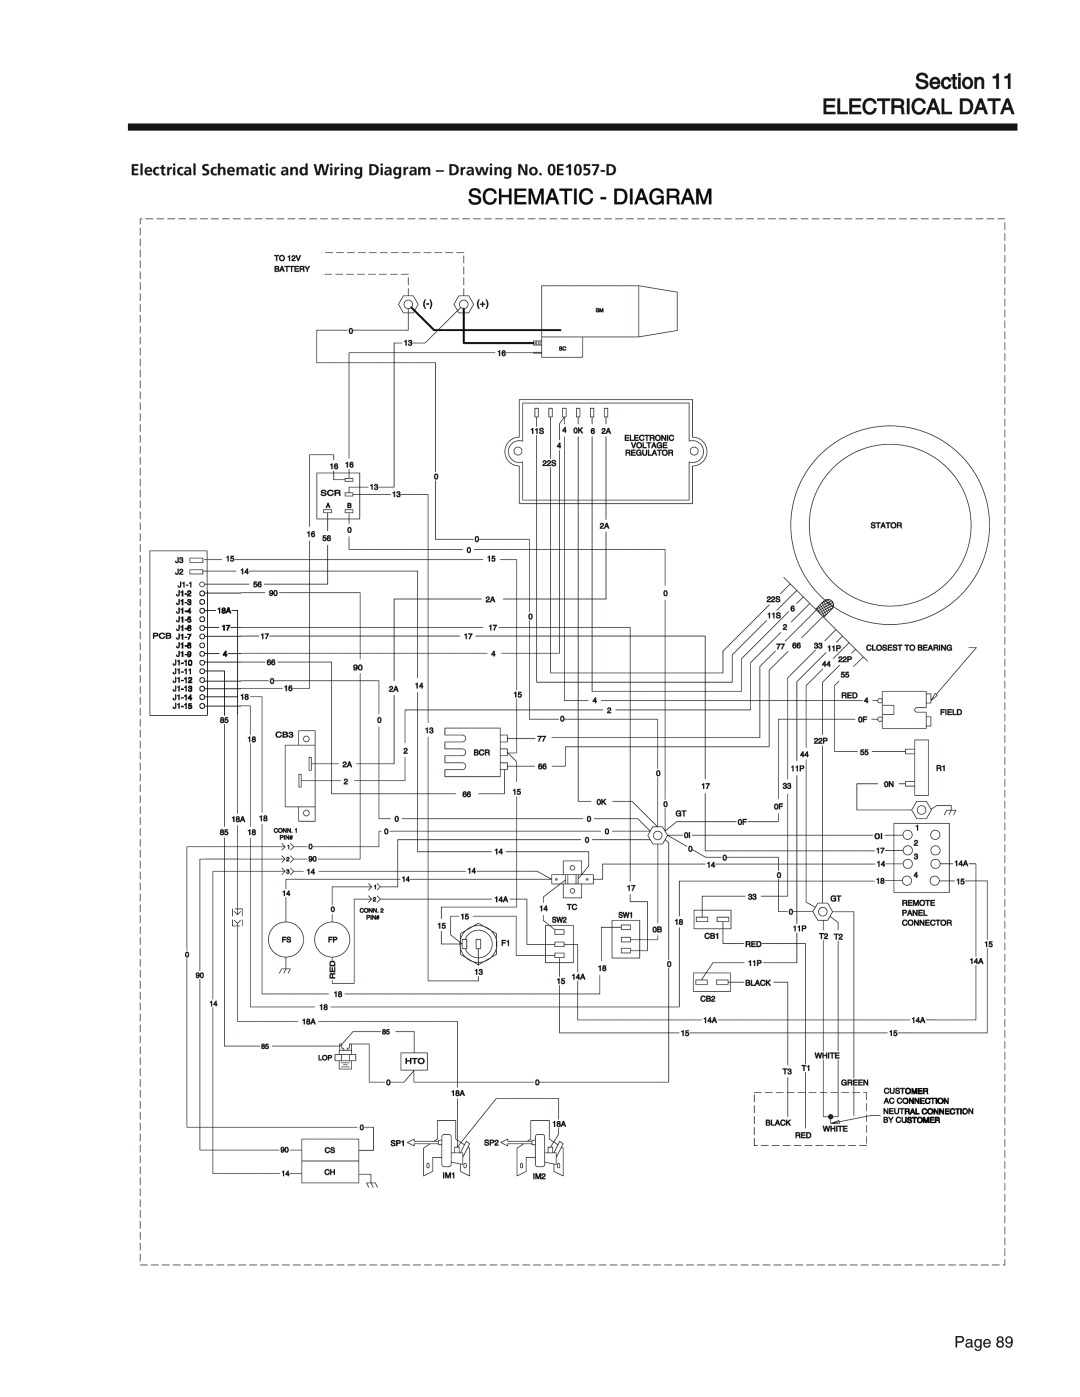 Generac Power Systems 75, 55, 65 manual Section ELECTRICAL DATA, Page 